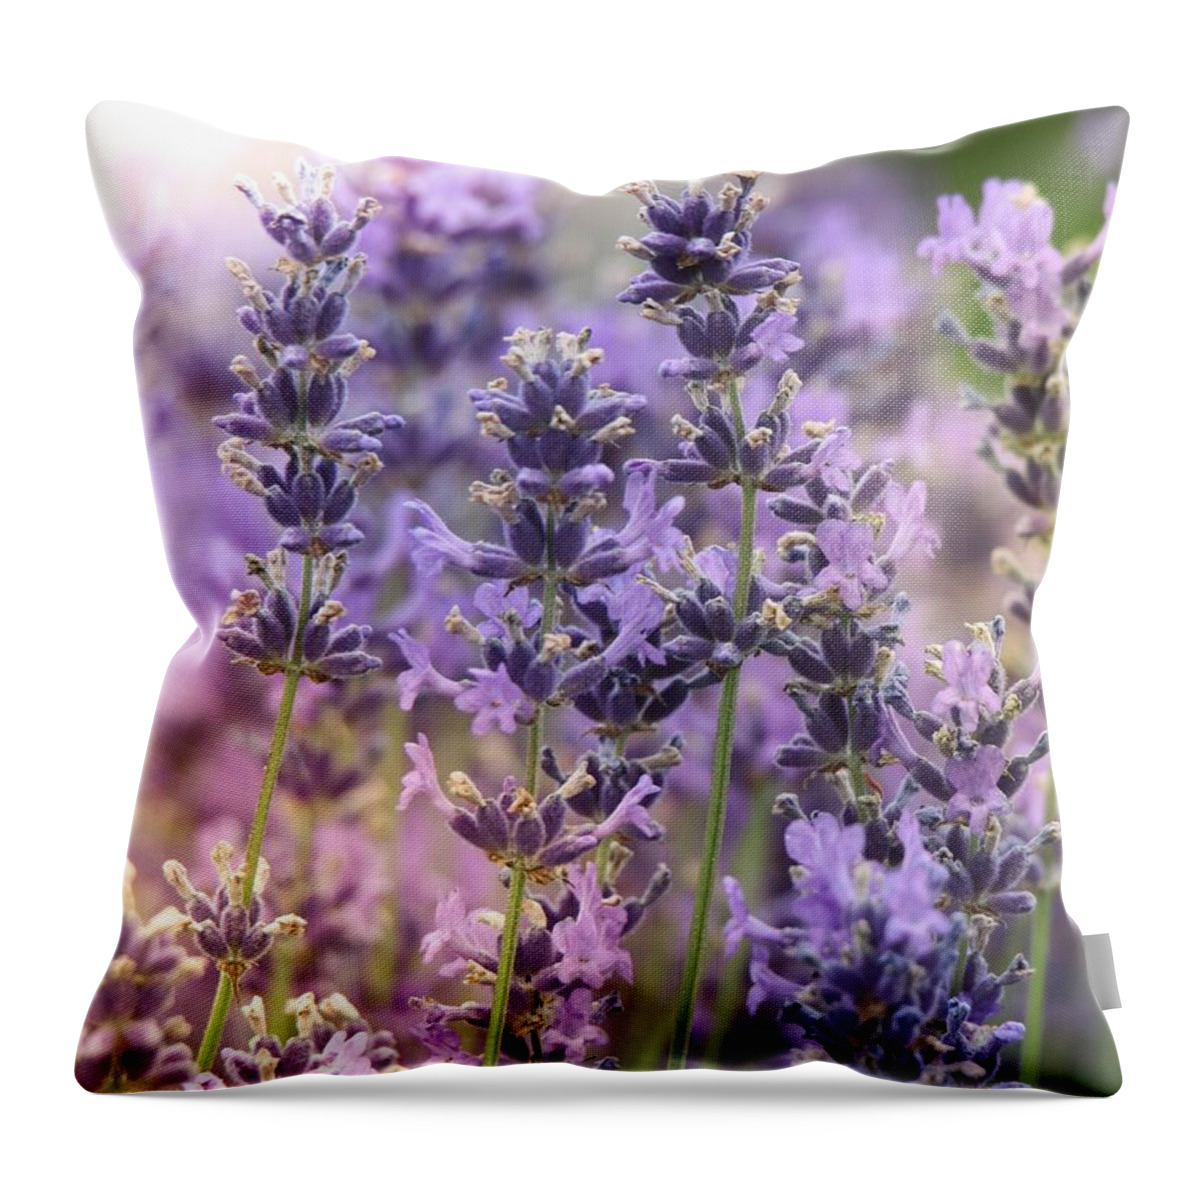 Lavender Throw Pillow featuring the photograph Fresh Lavender by Susan Rydberg